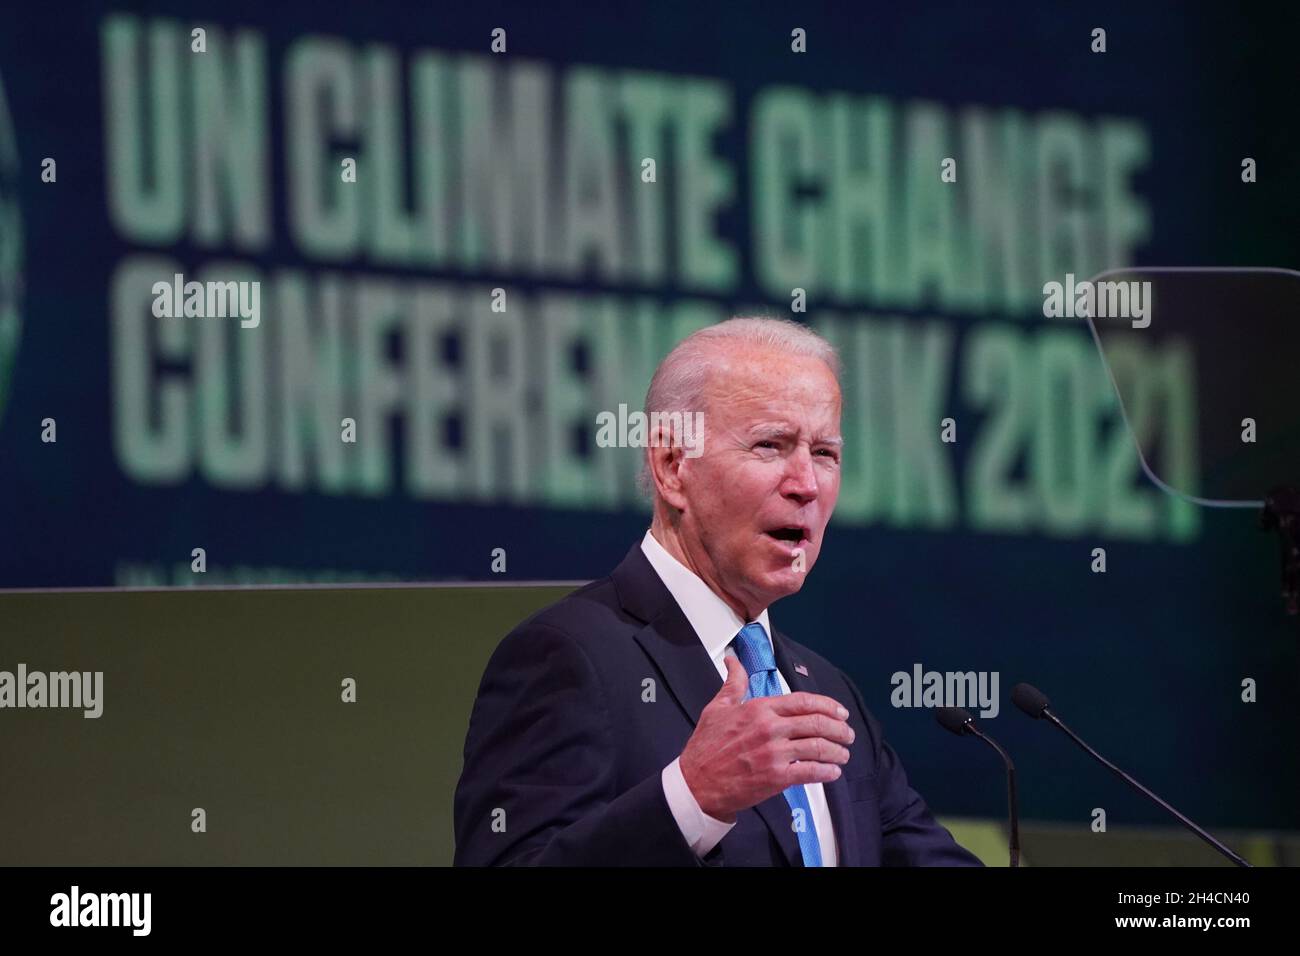 US President Joe Biden speaks at the Leaders' Action on Forests and Land-use event during the Cop26 summit at the Scottish Event Campus (SEC) in Glasgow. Picture date: Tuesday November 2, 2021. Stock Photo